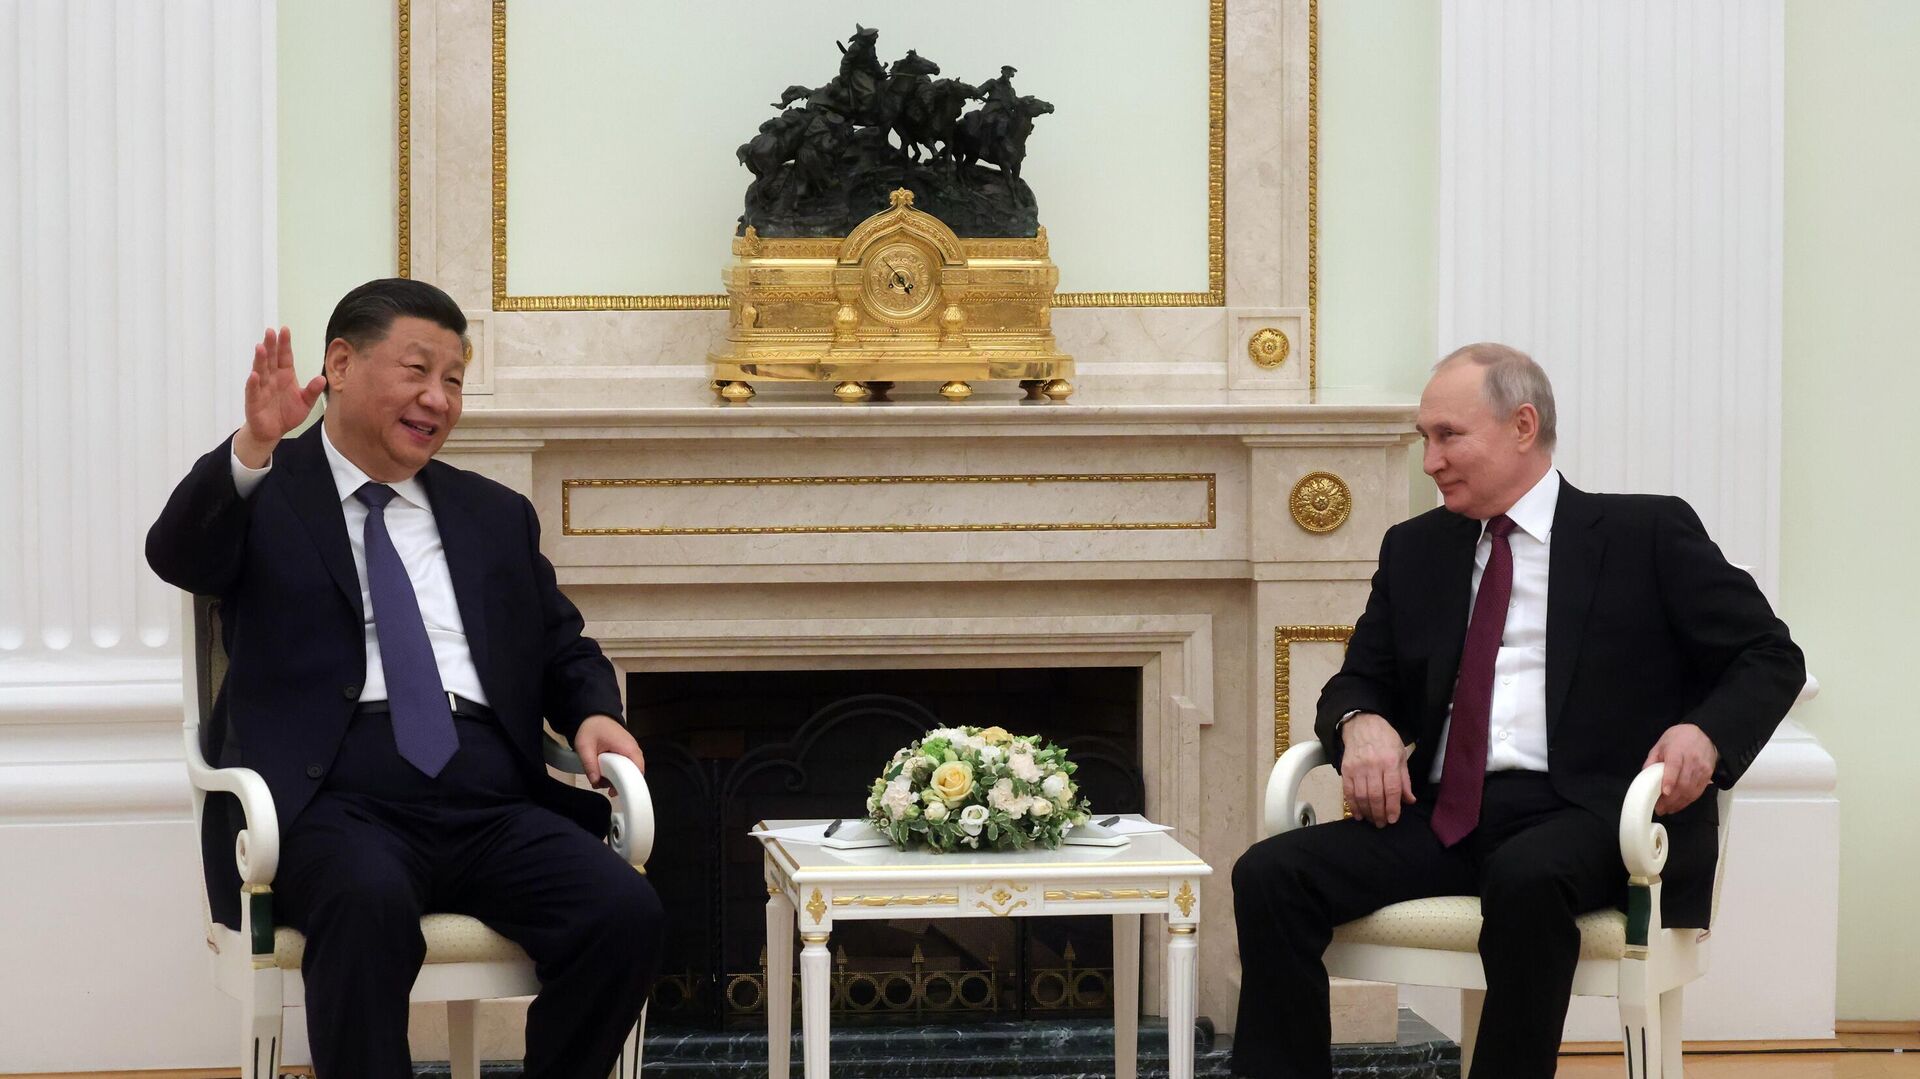 Chinese President Xi Jinping and Russian President Vladimir Putin attend a meeting at the Kremlin in Moscow, Russia. - Sputnik International, 1920, 21.03.2023